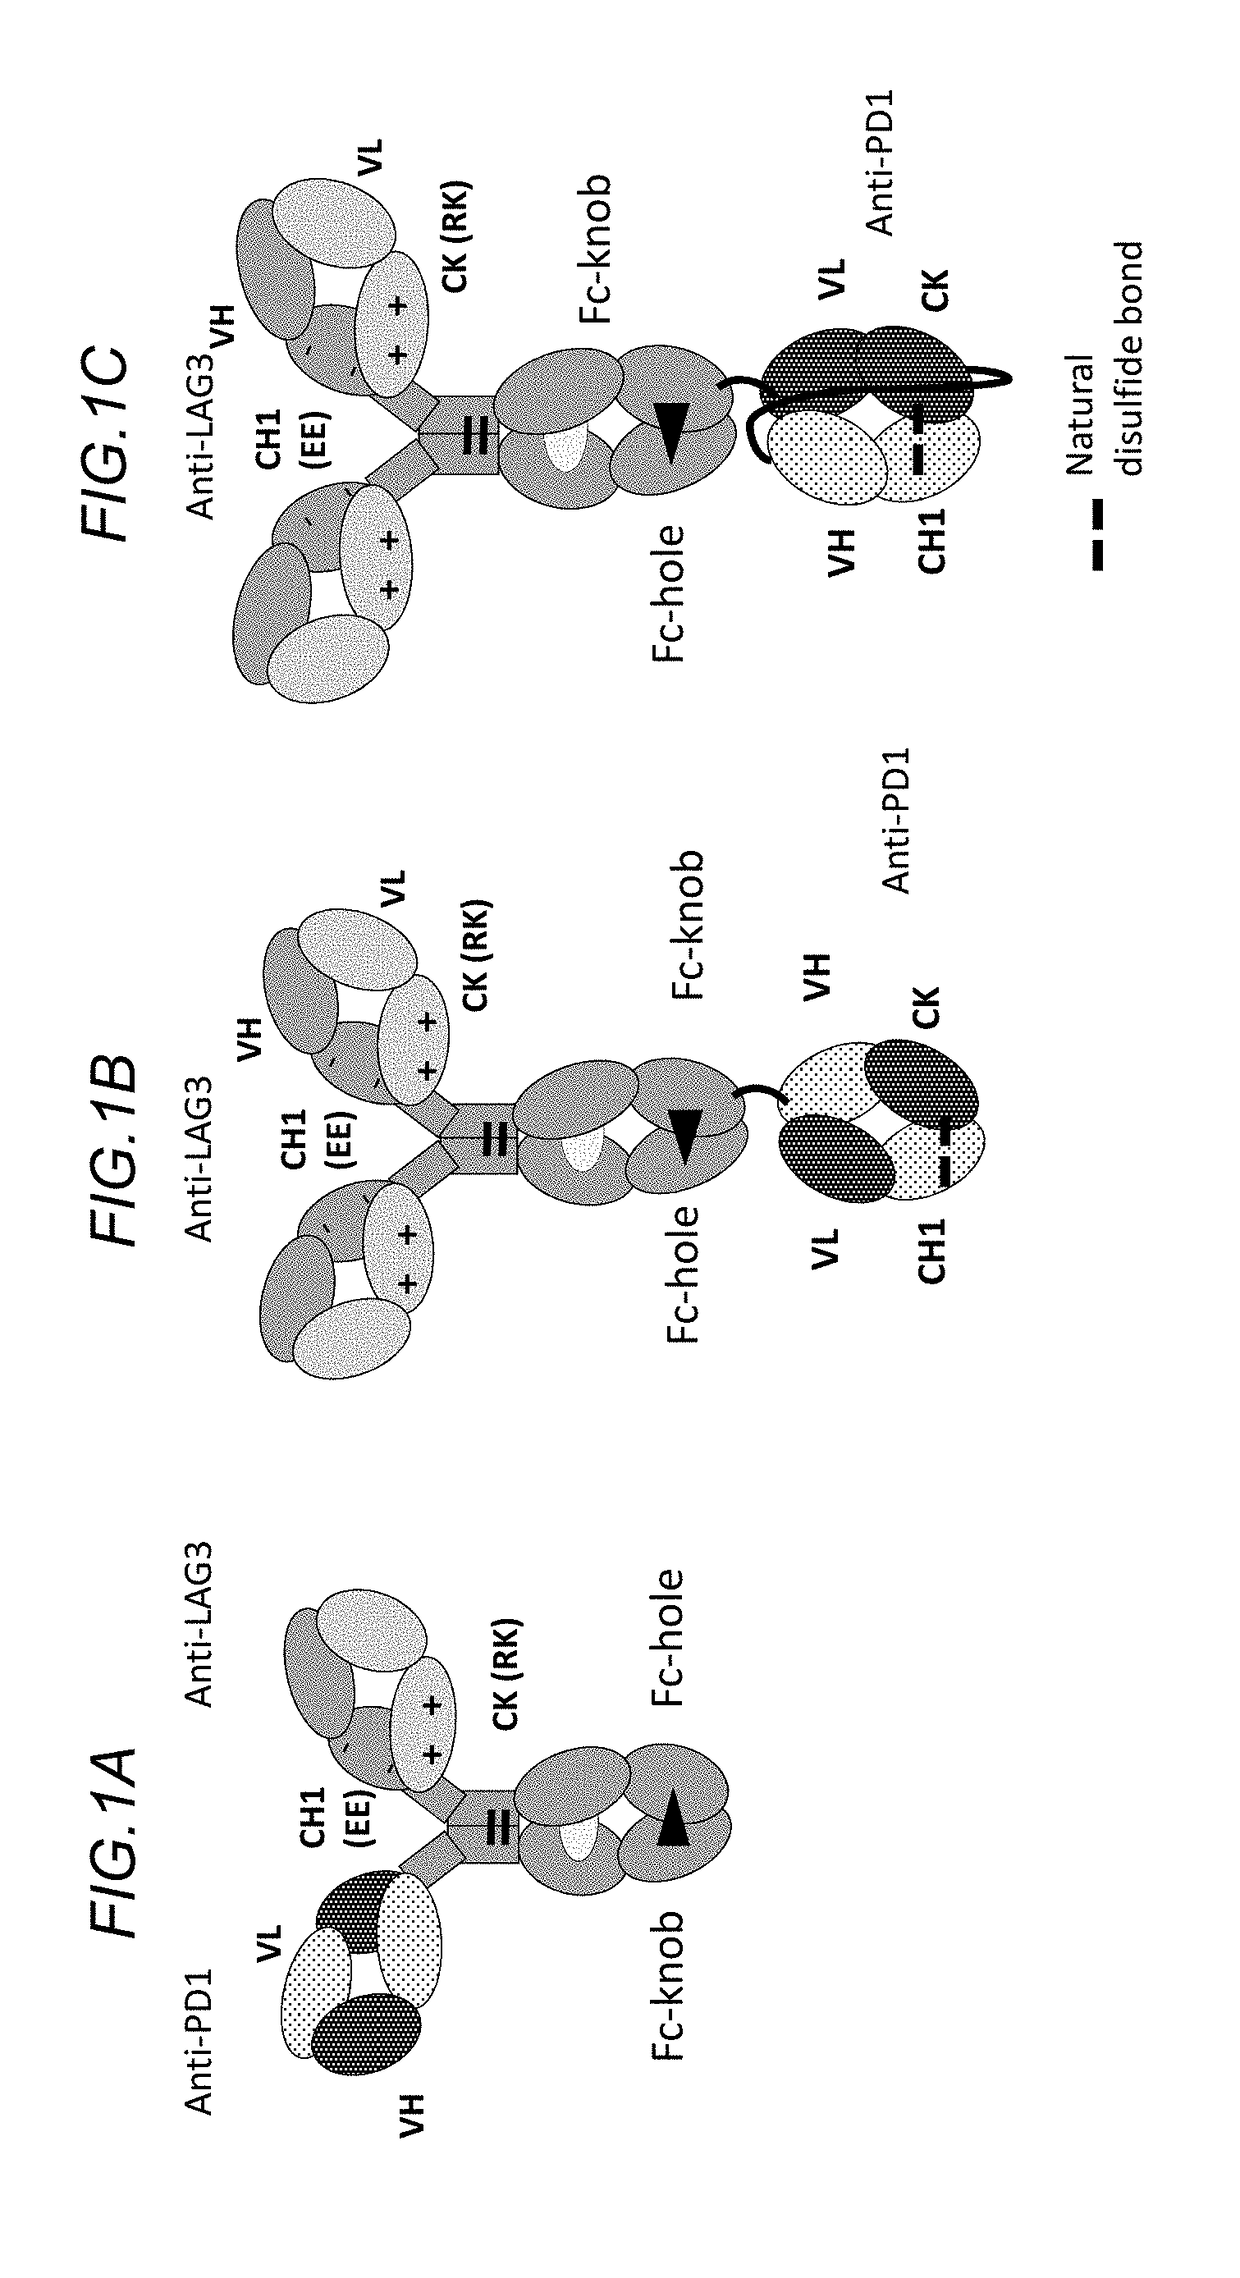 Bispecific antibodies specifically binding to pd1 and lag3